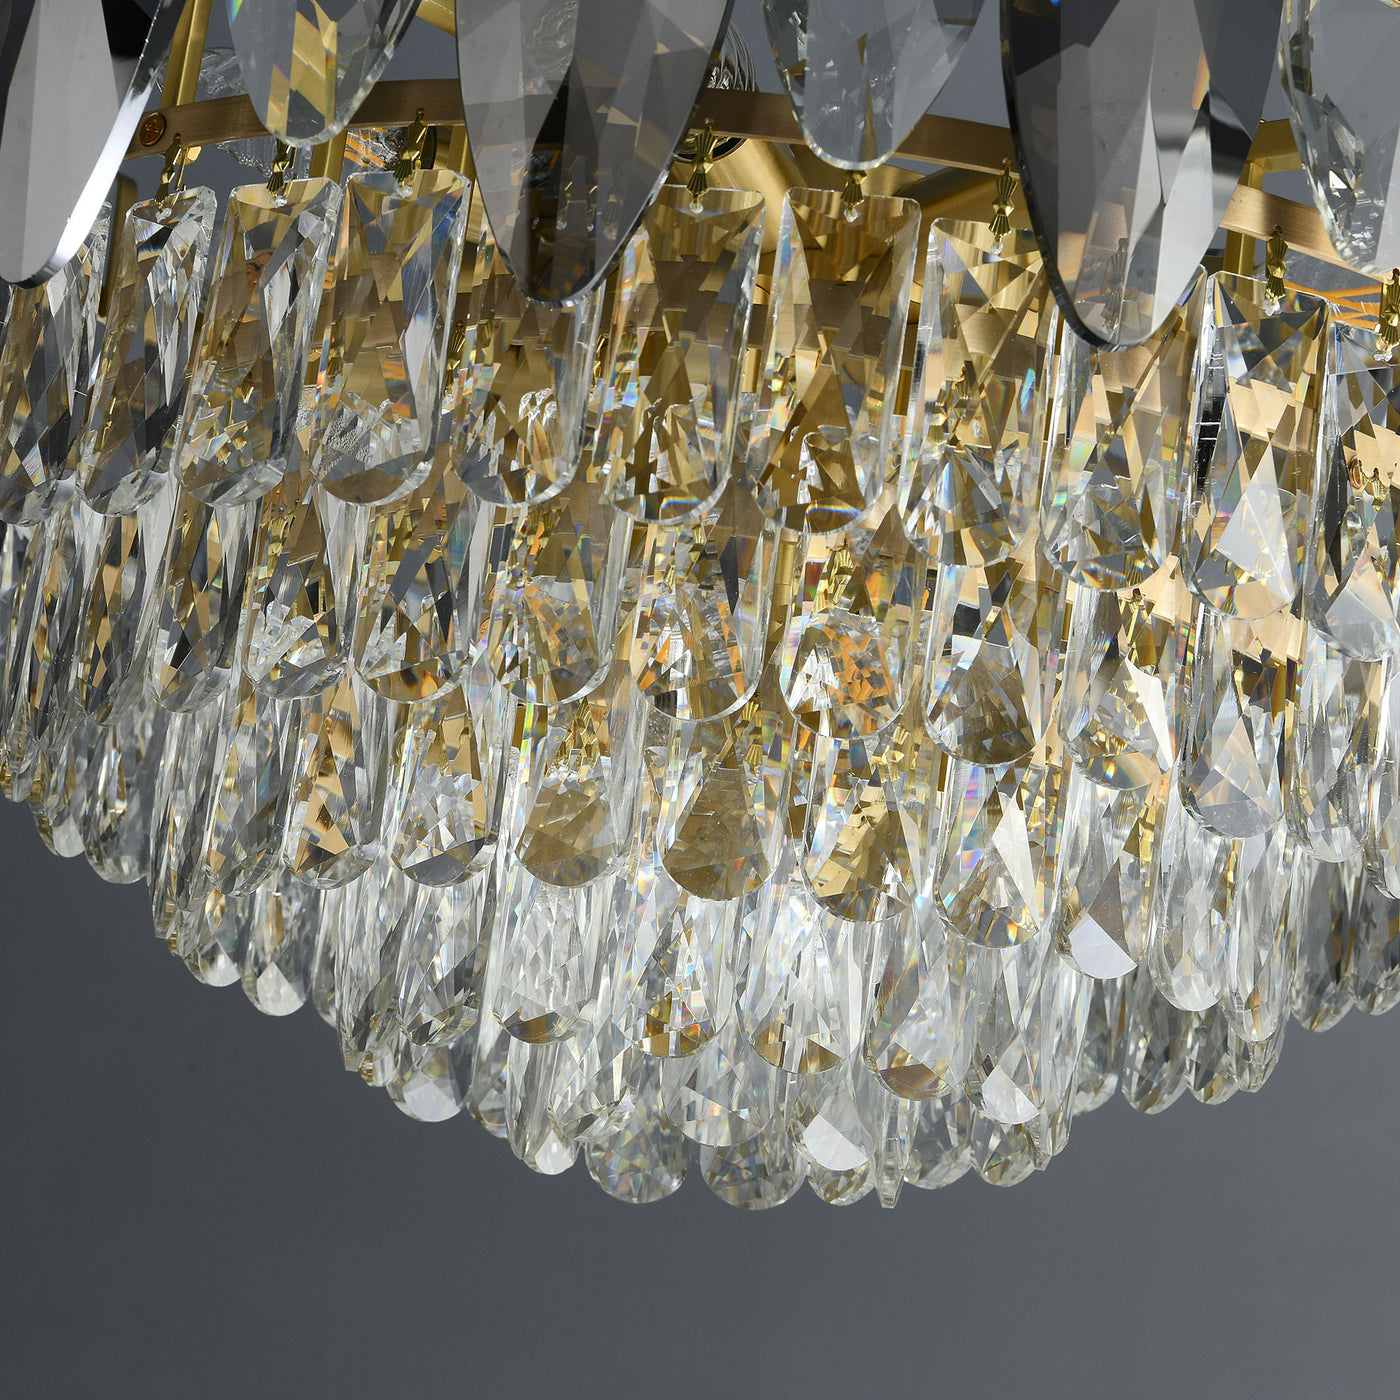 Industrial Conical style crystal chandelier